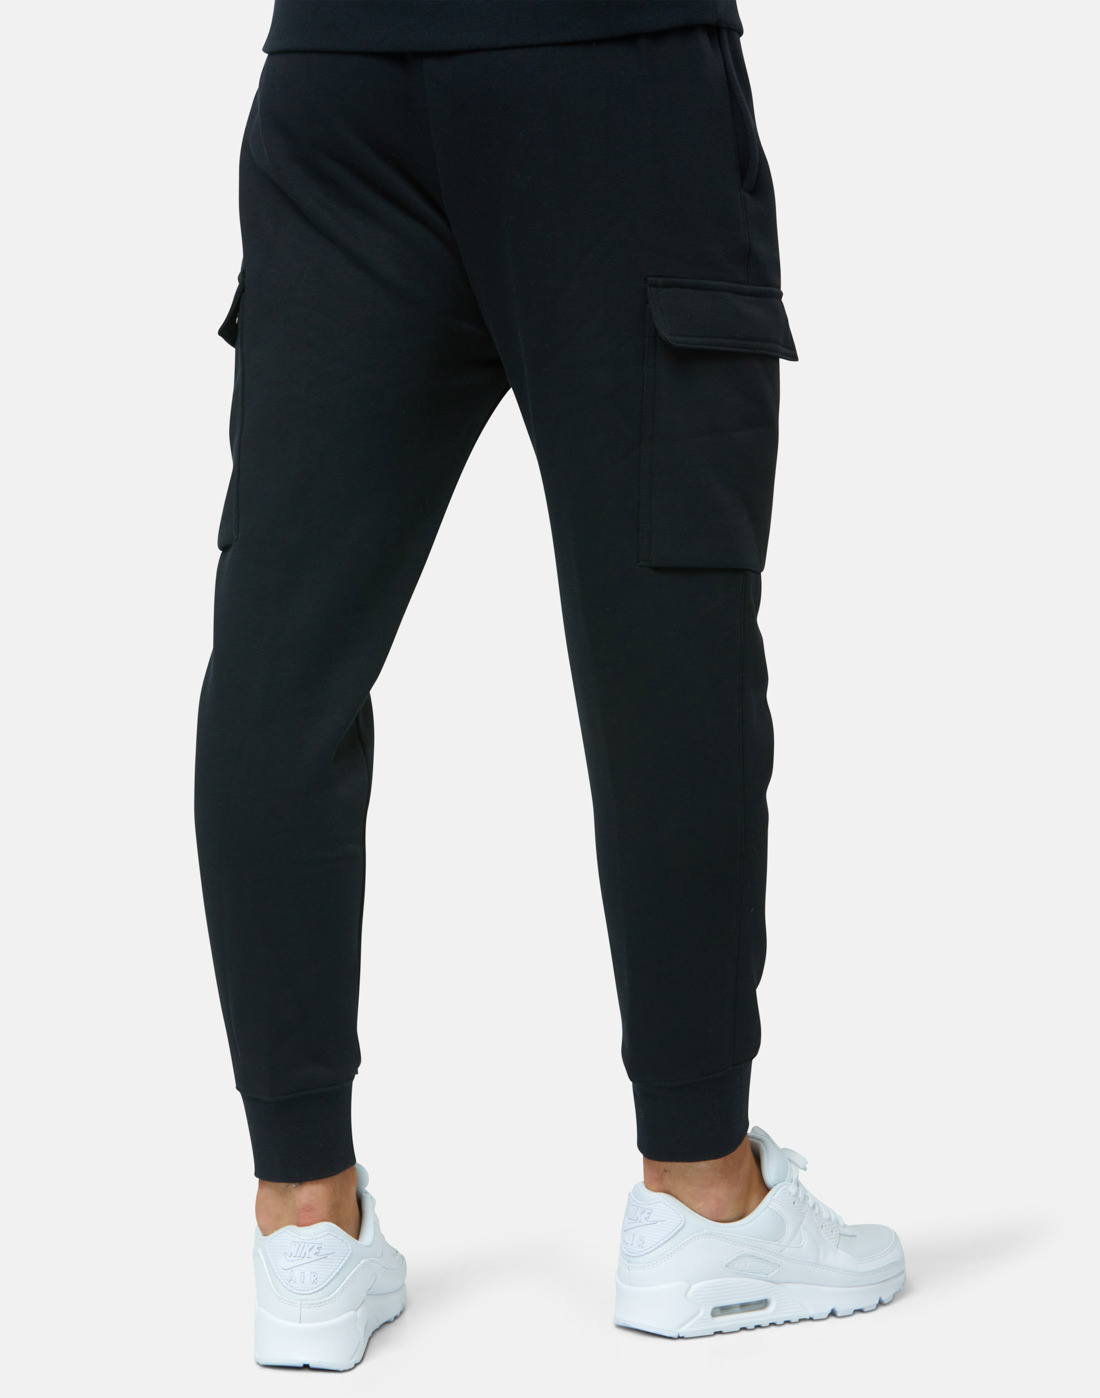 The Best Cargo Pants and Shorts by Nike. Nike.com